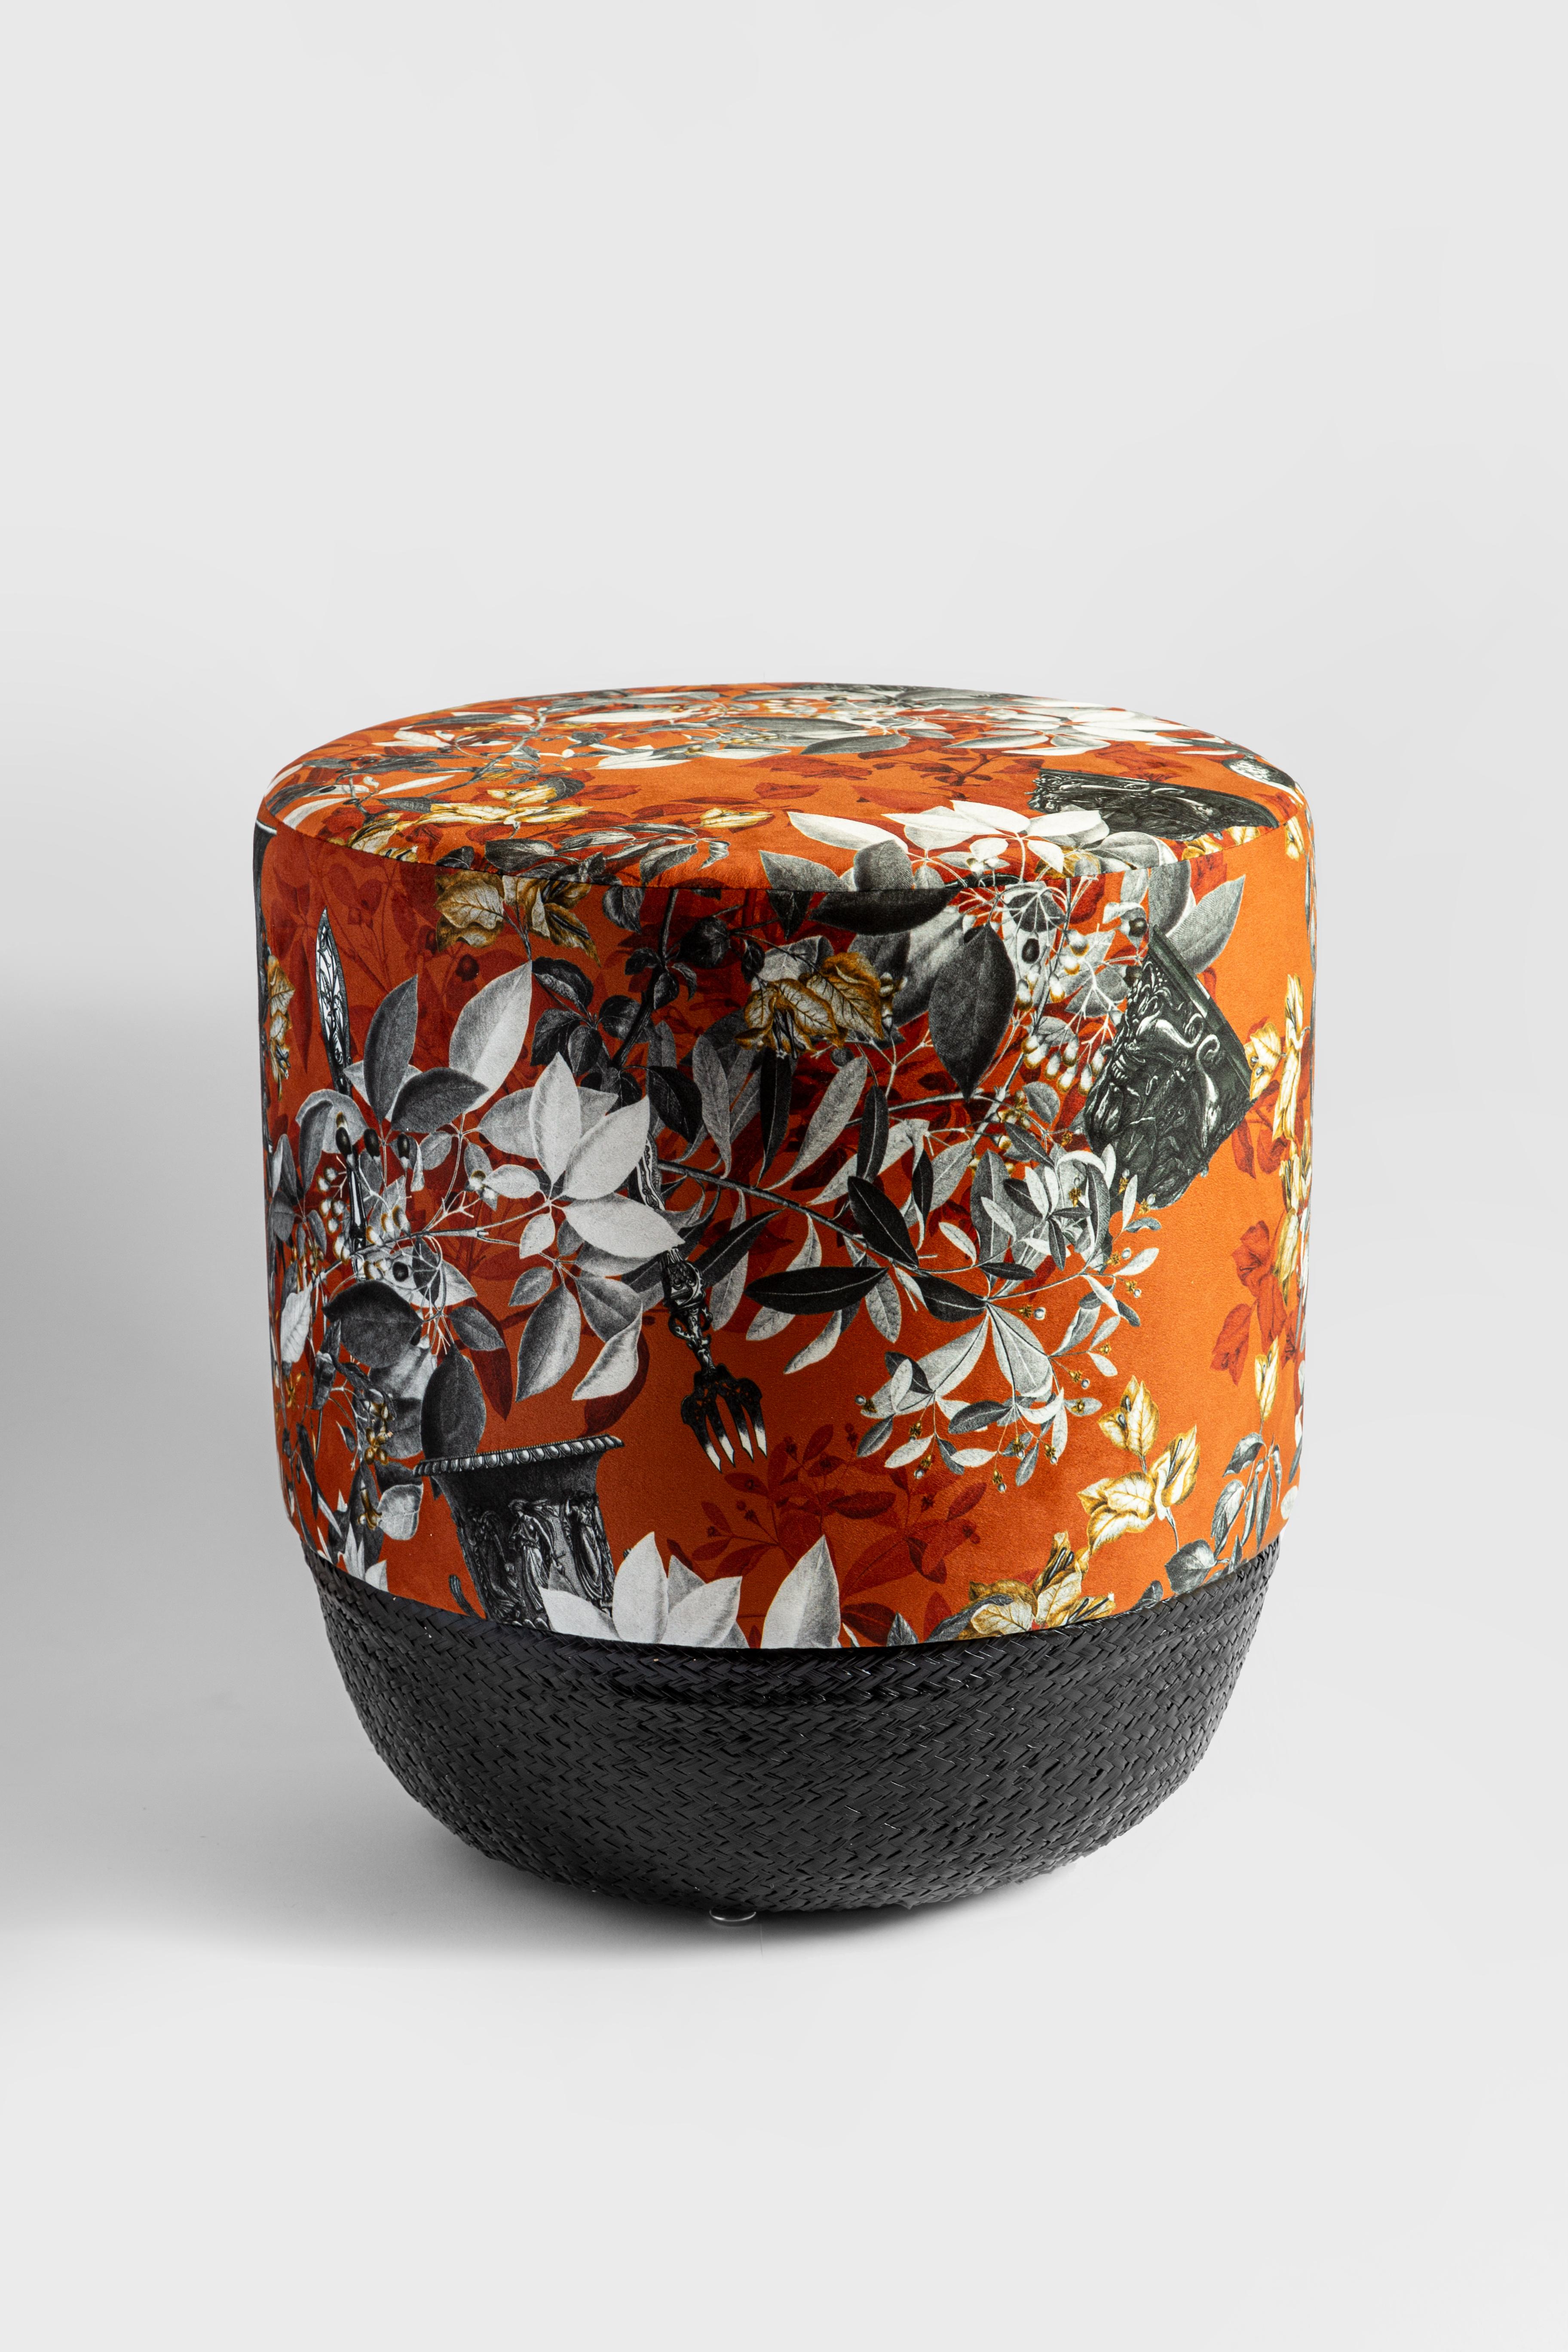 Pouf handmade by Italian expert craftsmen. High quality black straw base and printed velvet covering.
This decoration aims to evoke the feeling of wonder and splendor that can be experienced during a sunset dinner in Rome during the spring season.